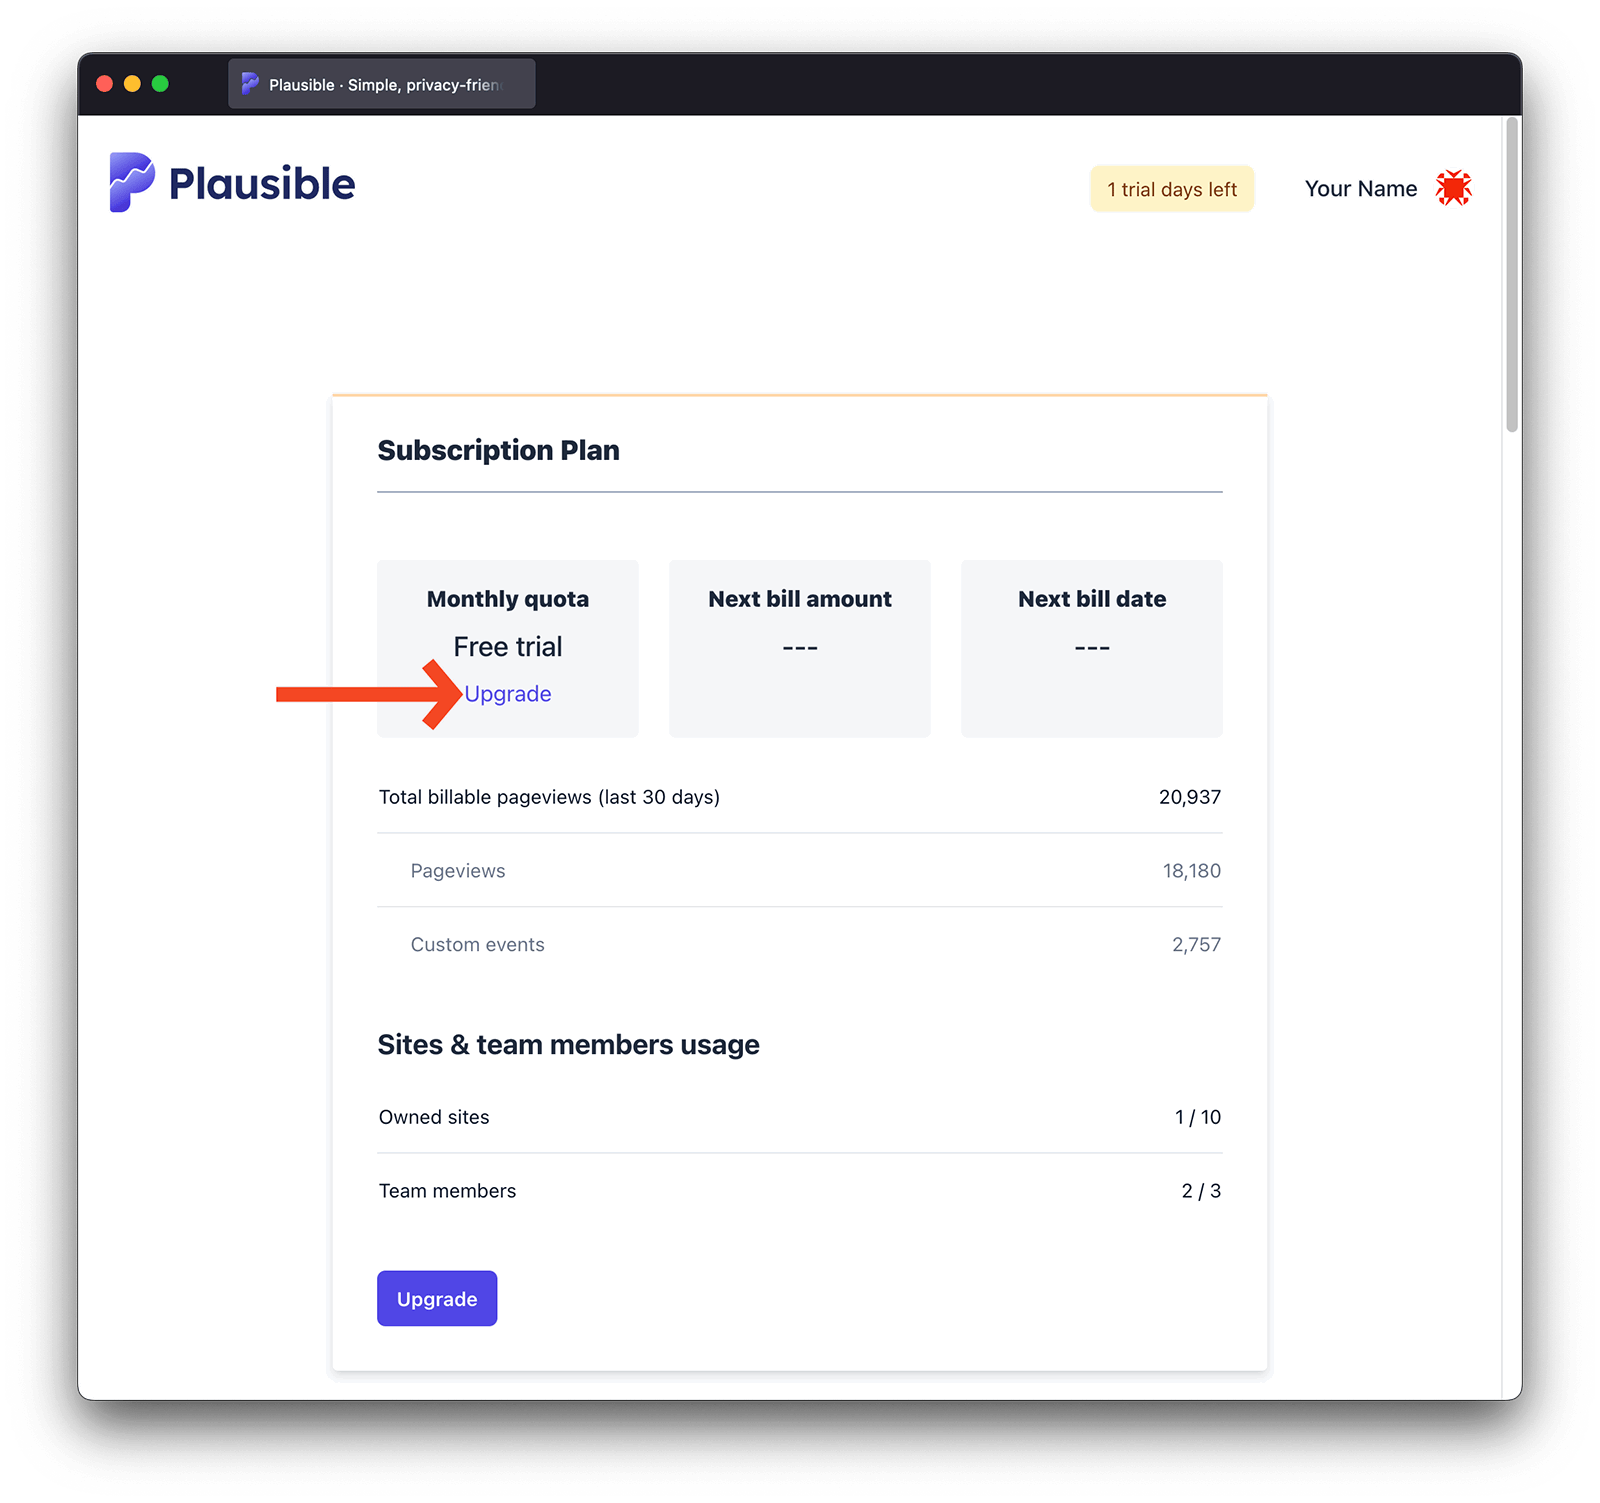 Upgrade your trial account to a paid subscription